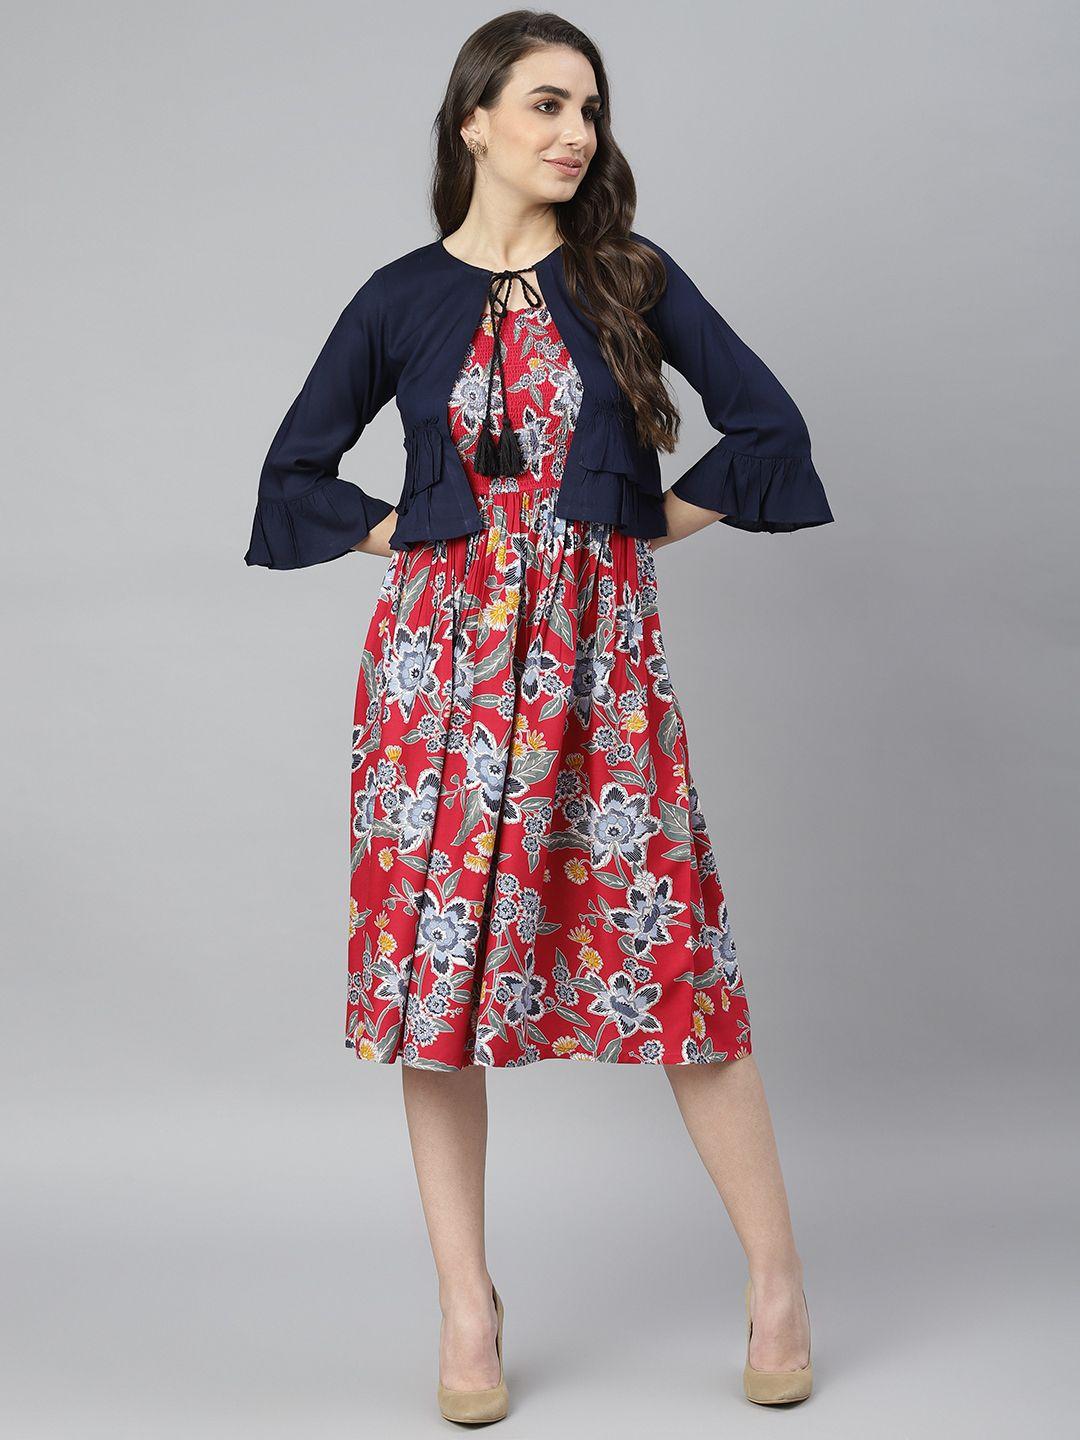 deebaco red floral dress with ruffle shrug